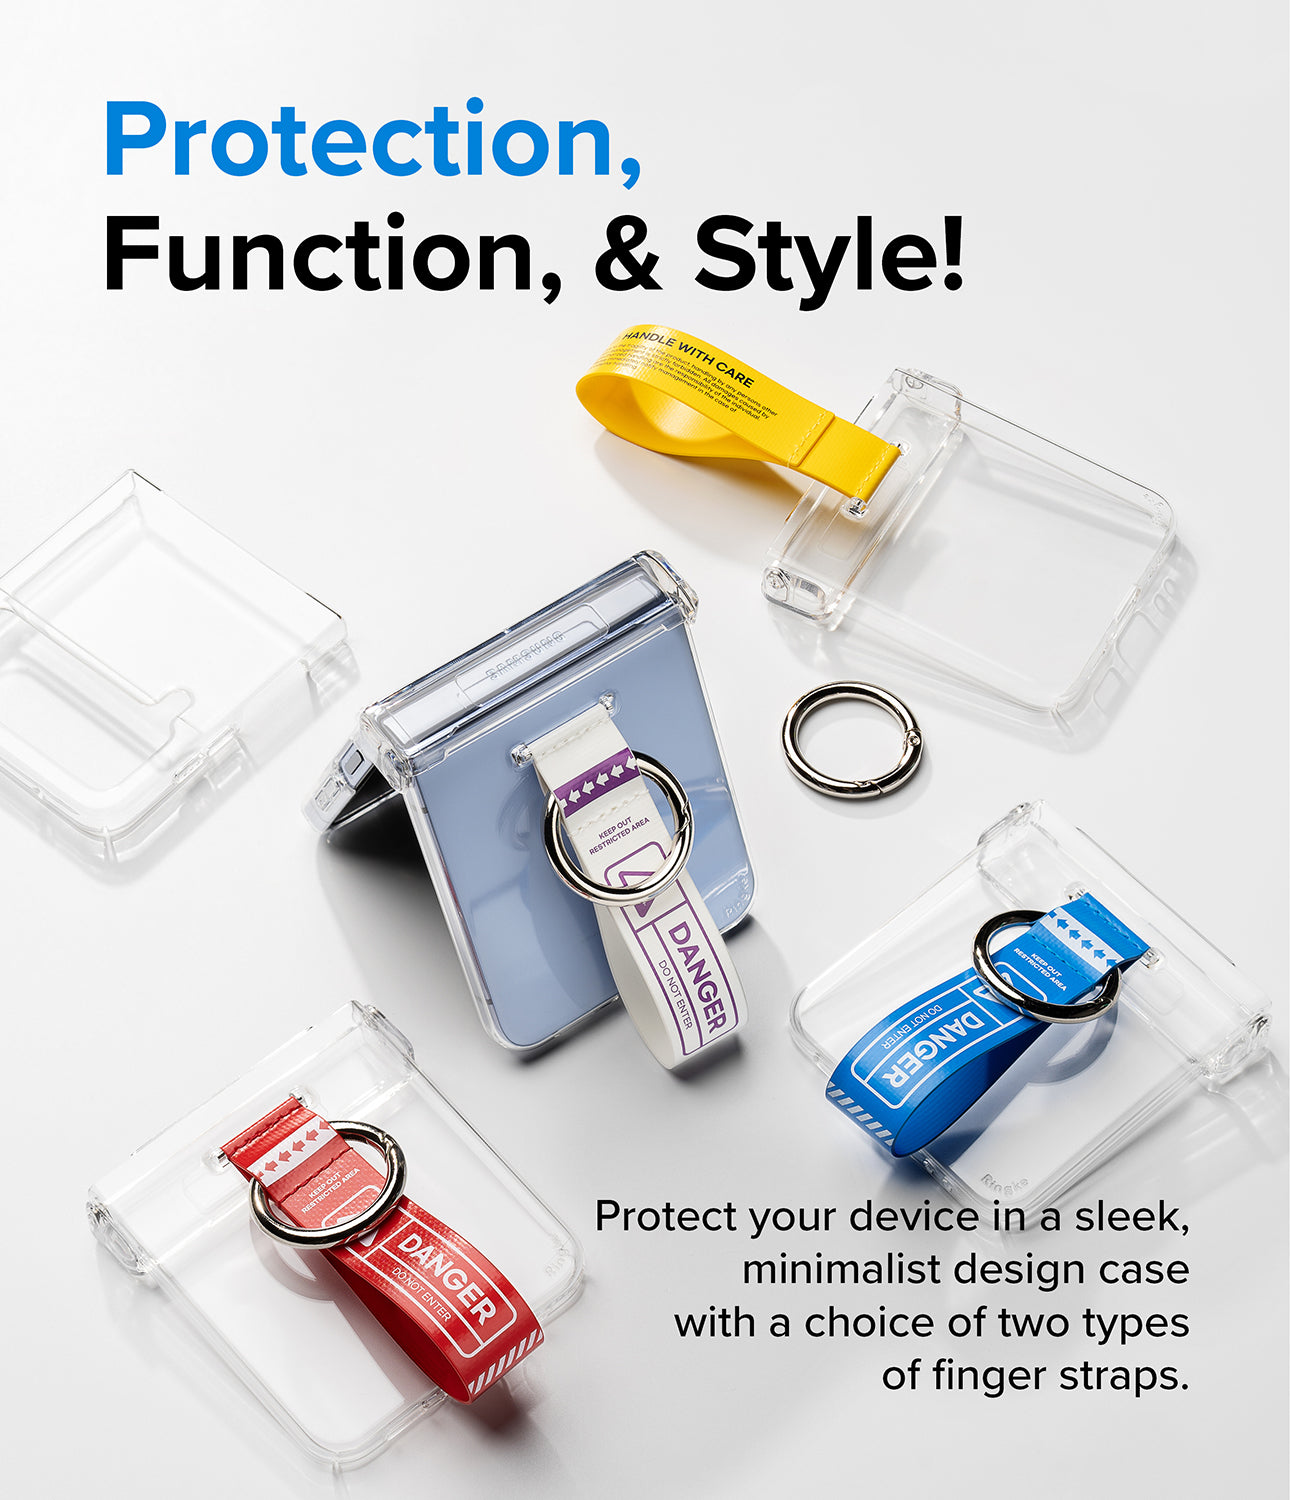 Protect your device in a sleek, minimalist design case with a choice of two types of finger straps.